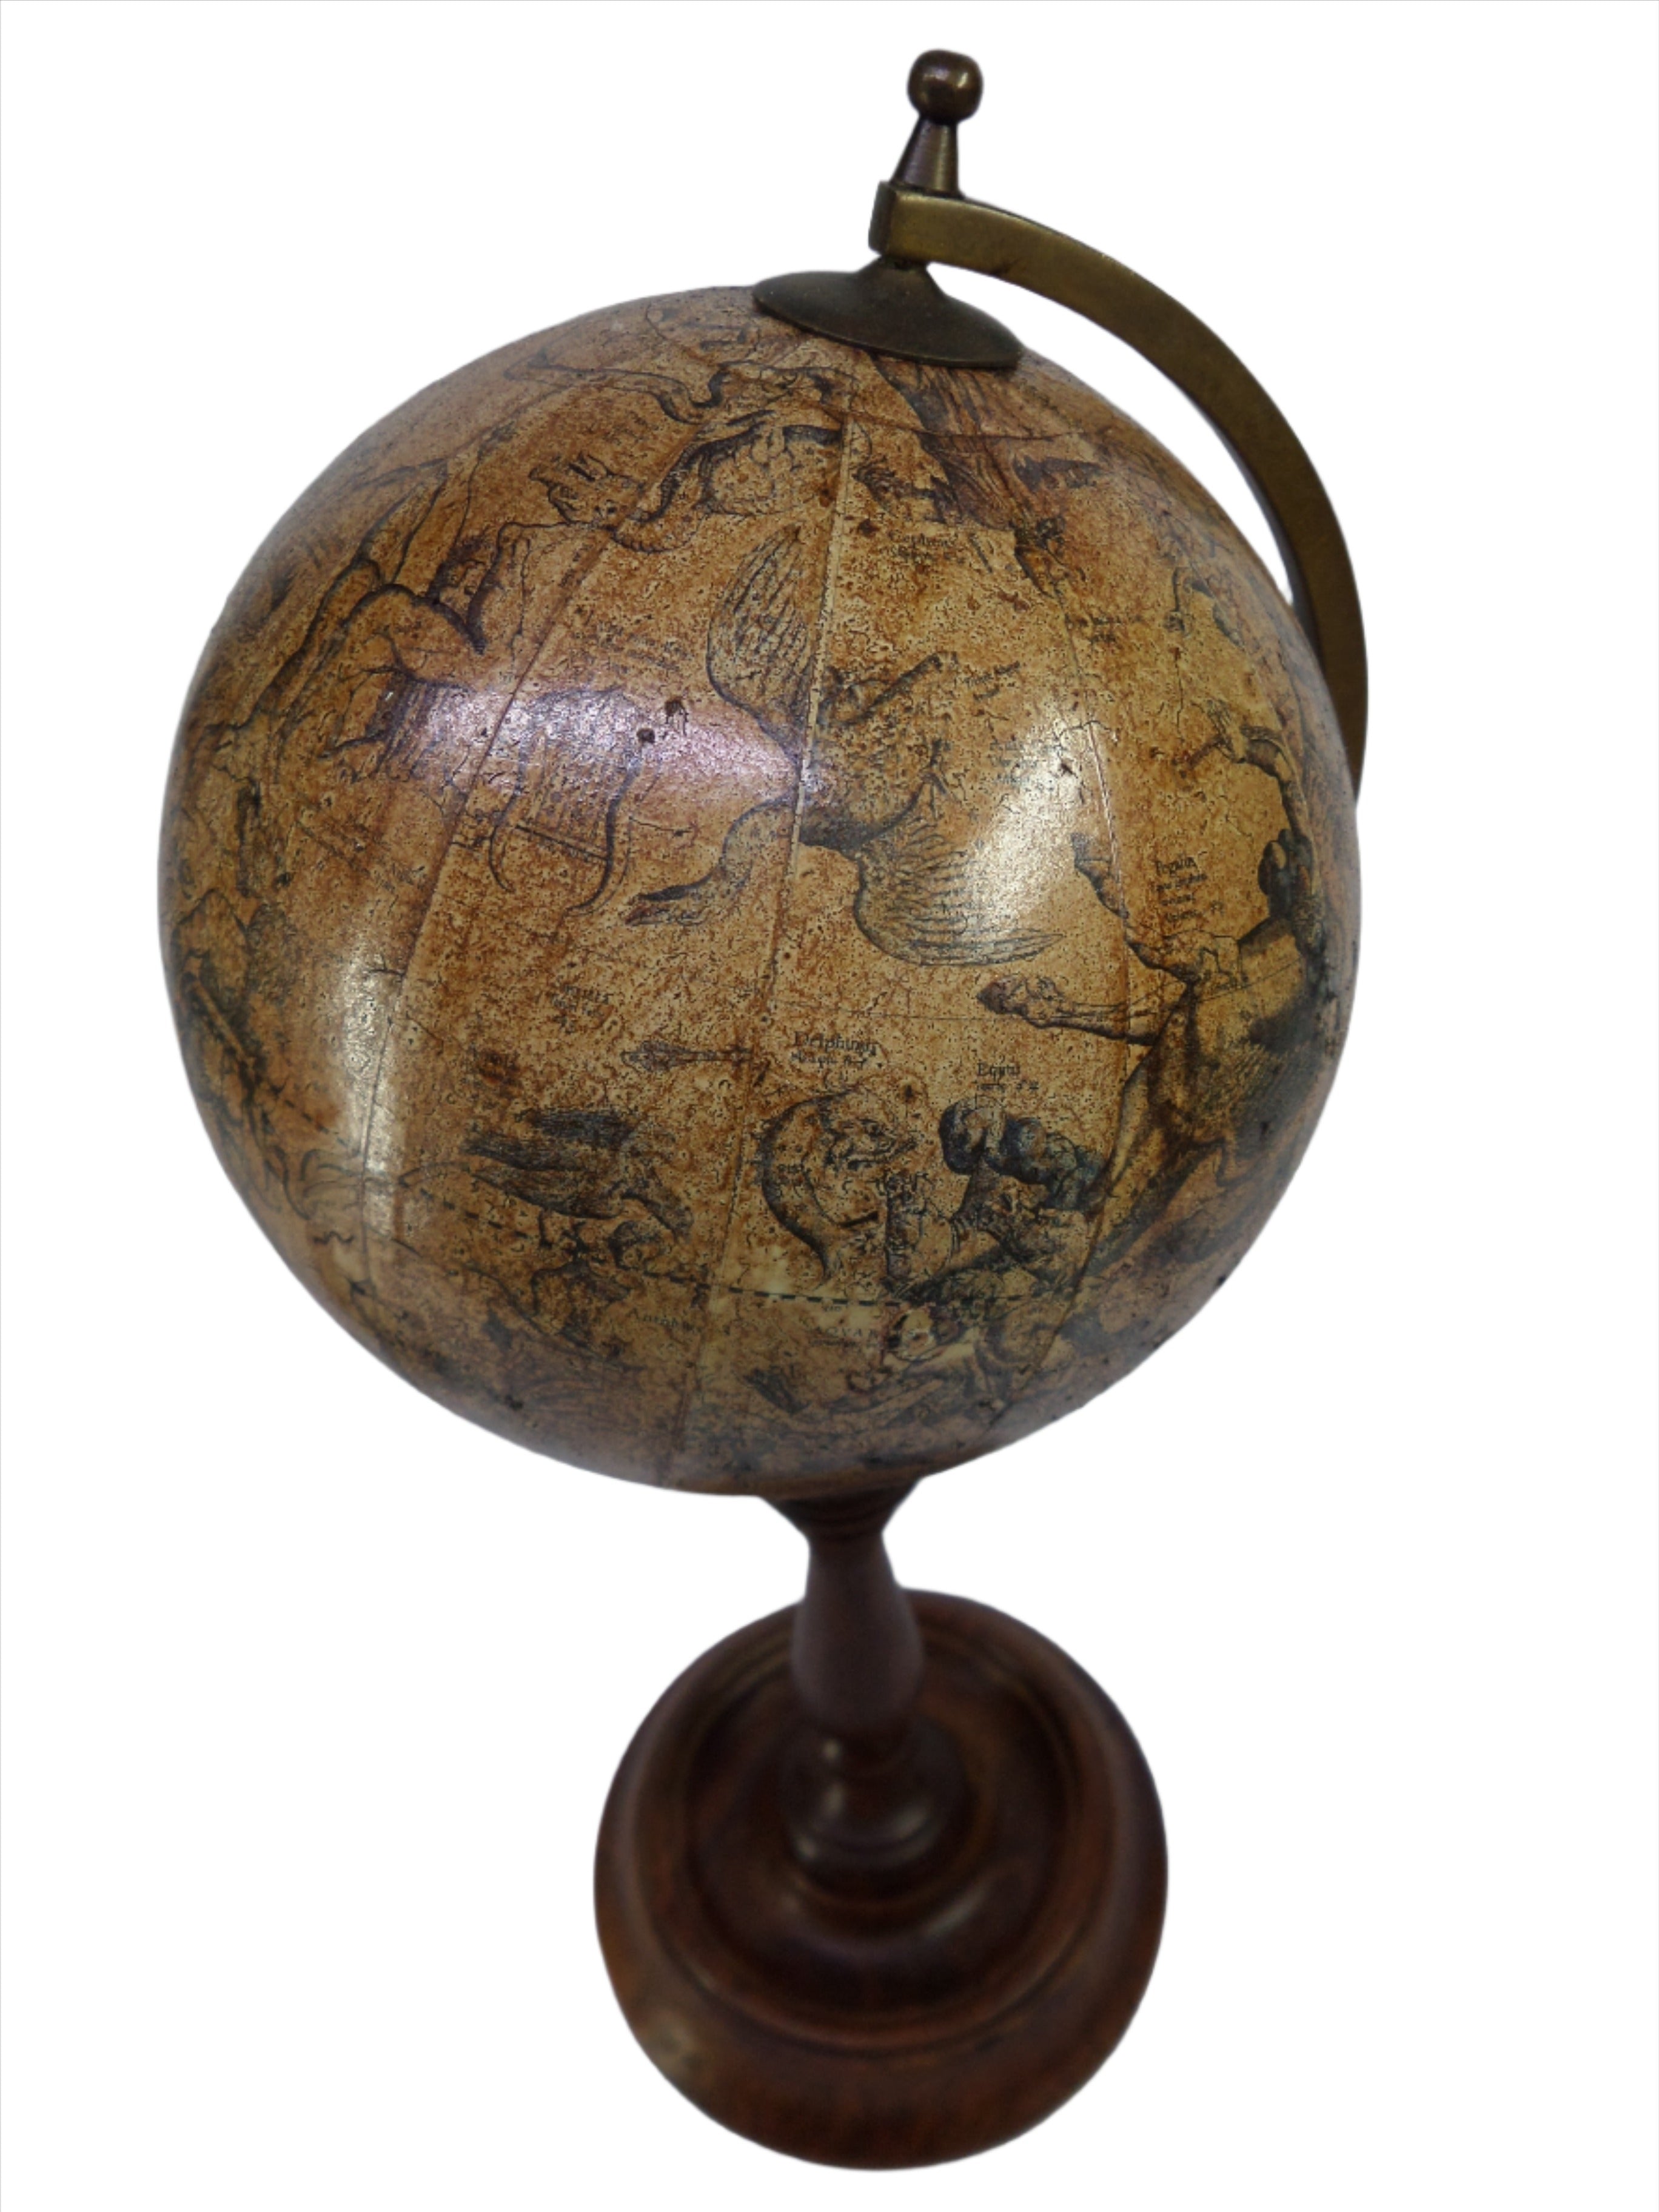 PAIR OF MINIATURE TERRESTRIAL AND CELESTIAL GLOBES